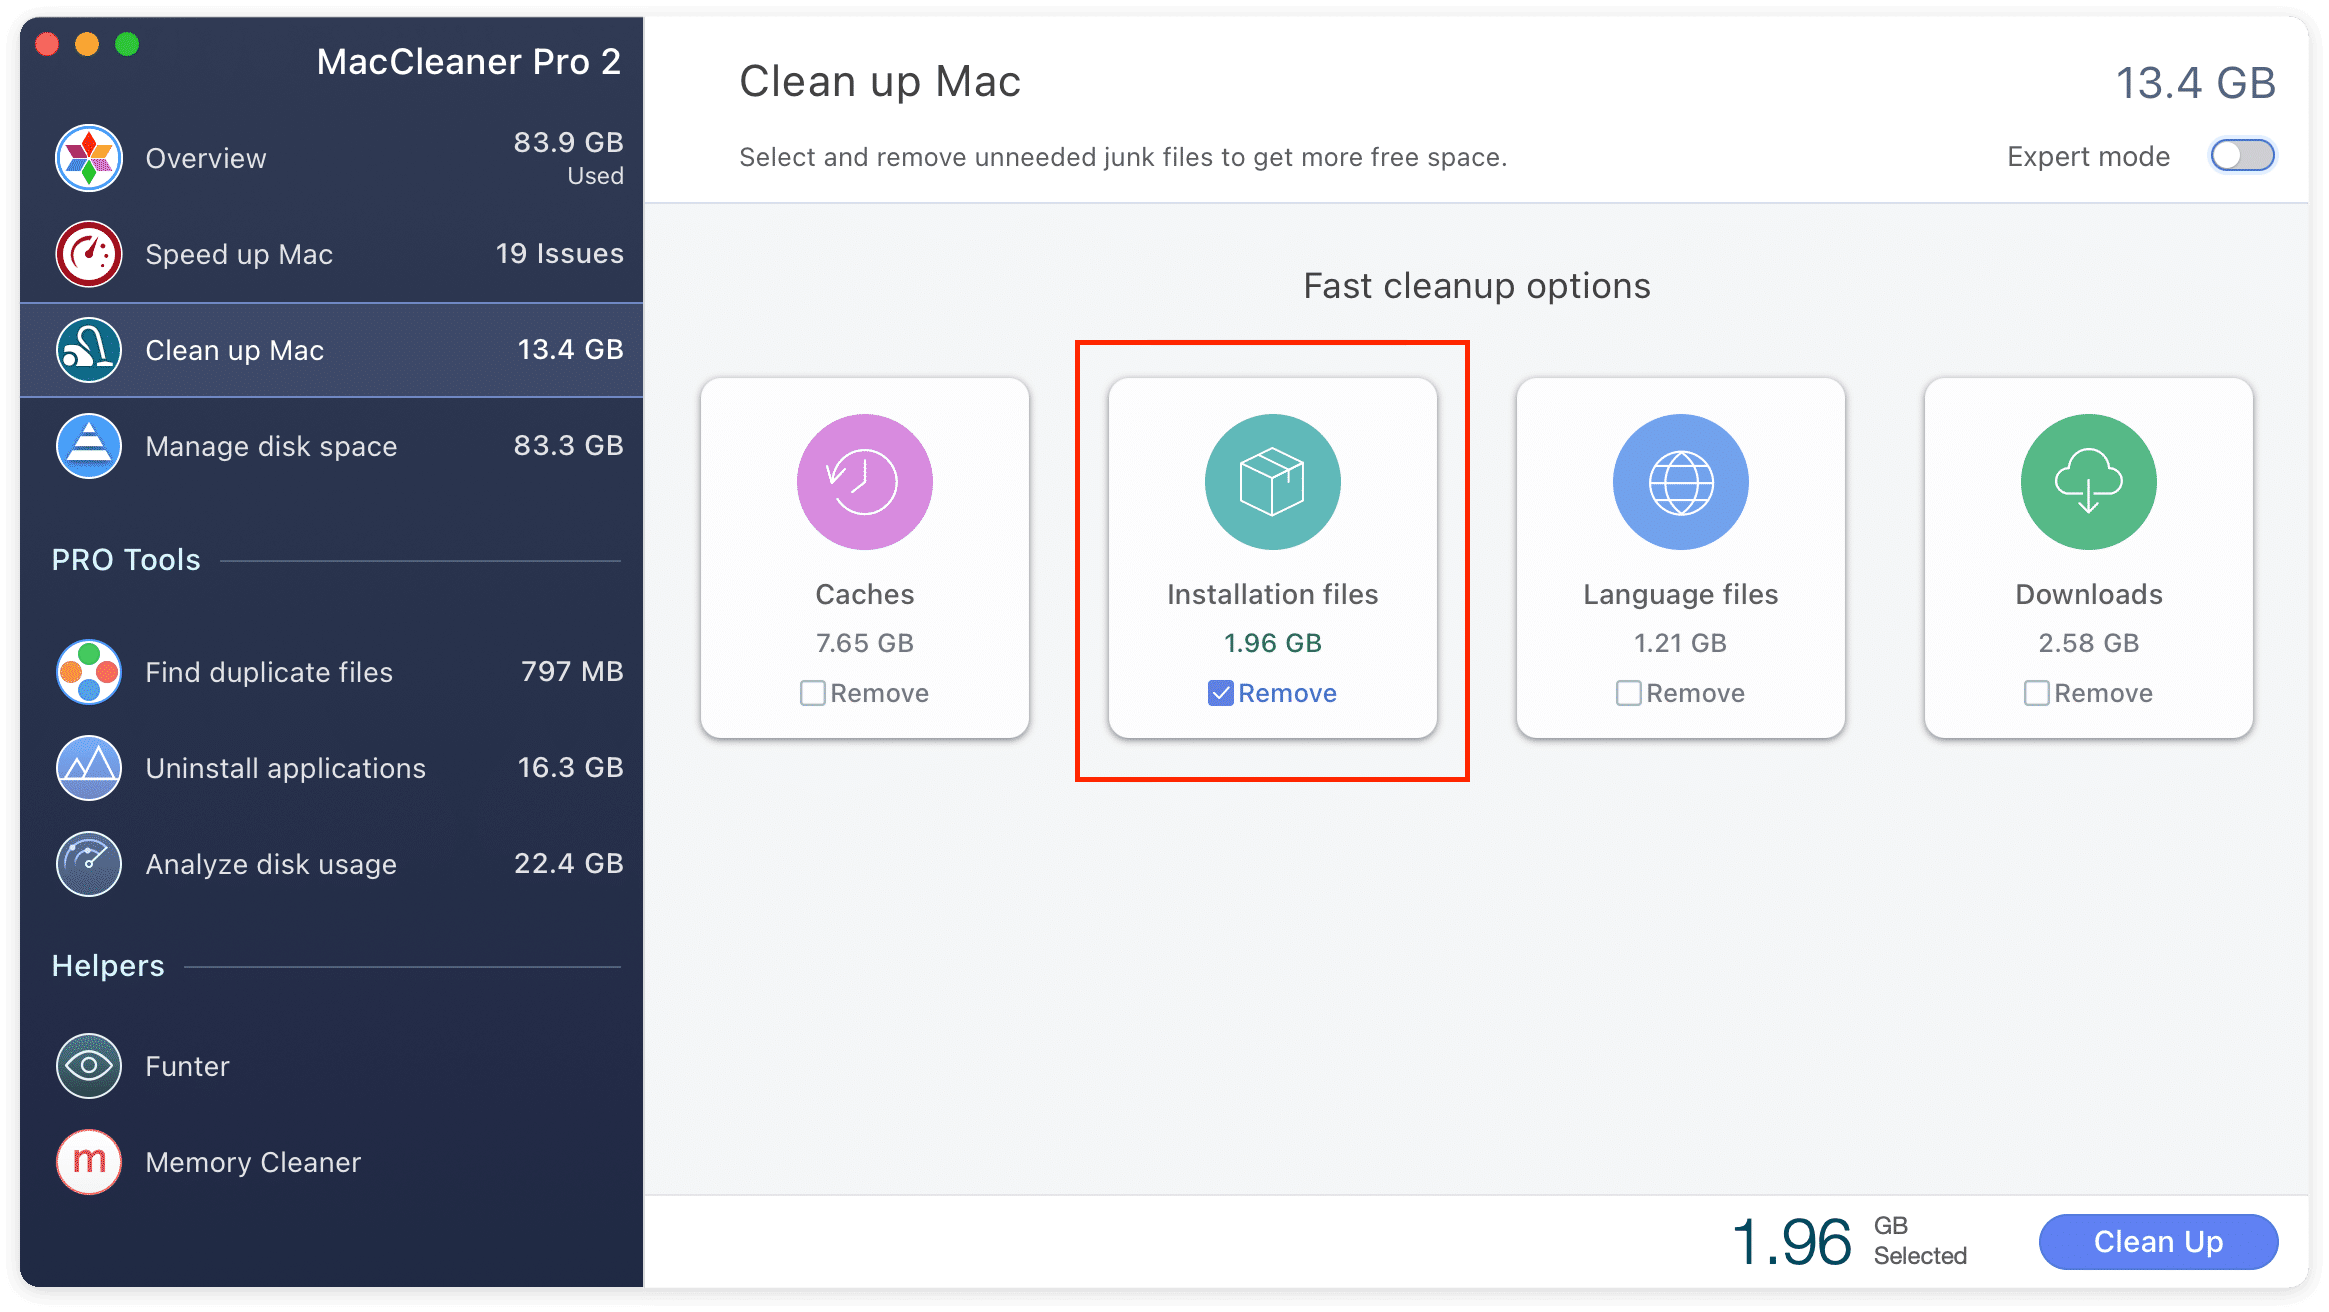 maccleaner pro window showing the option to remove installation files